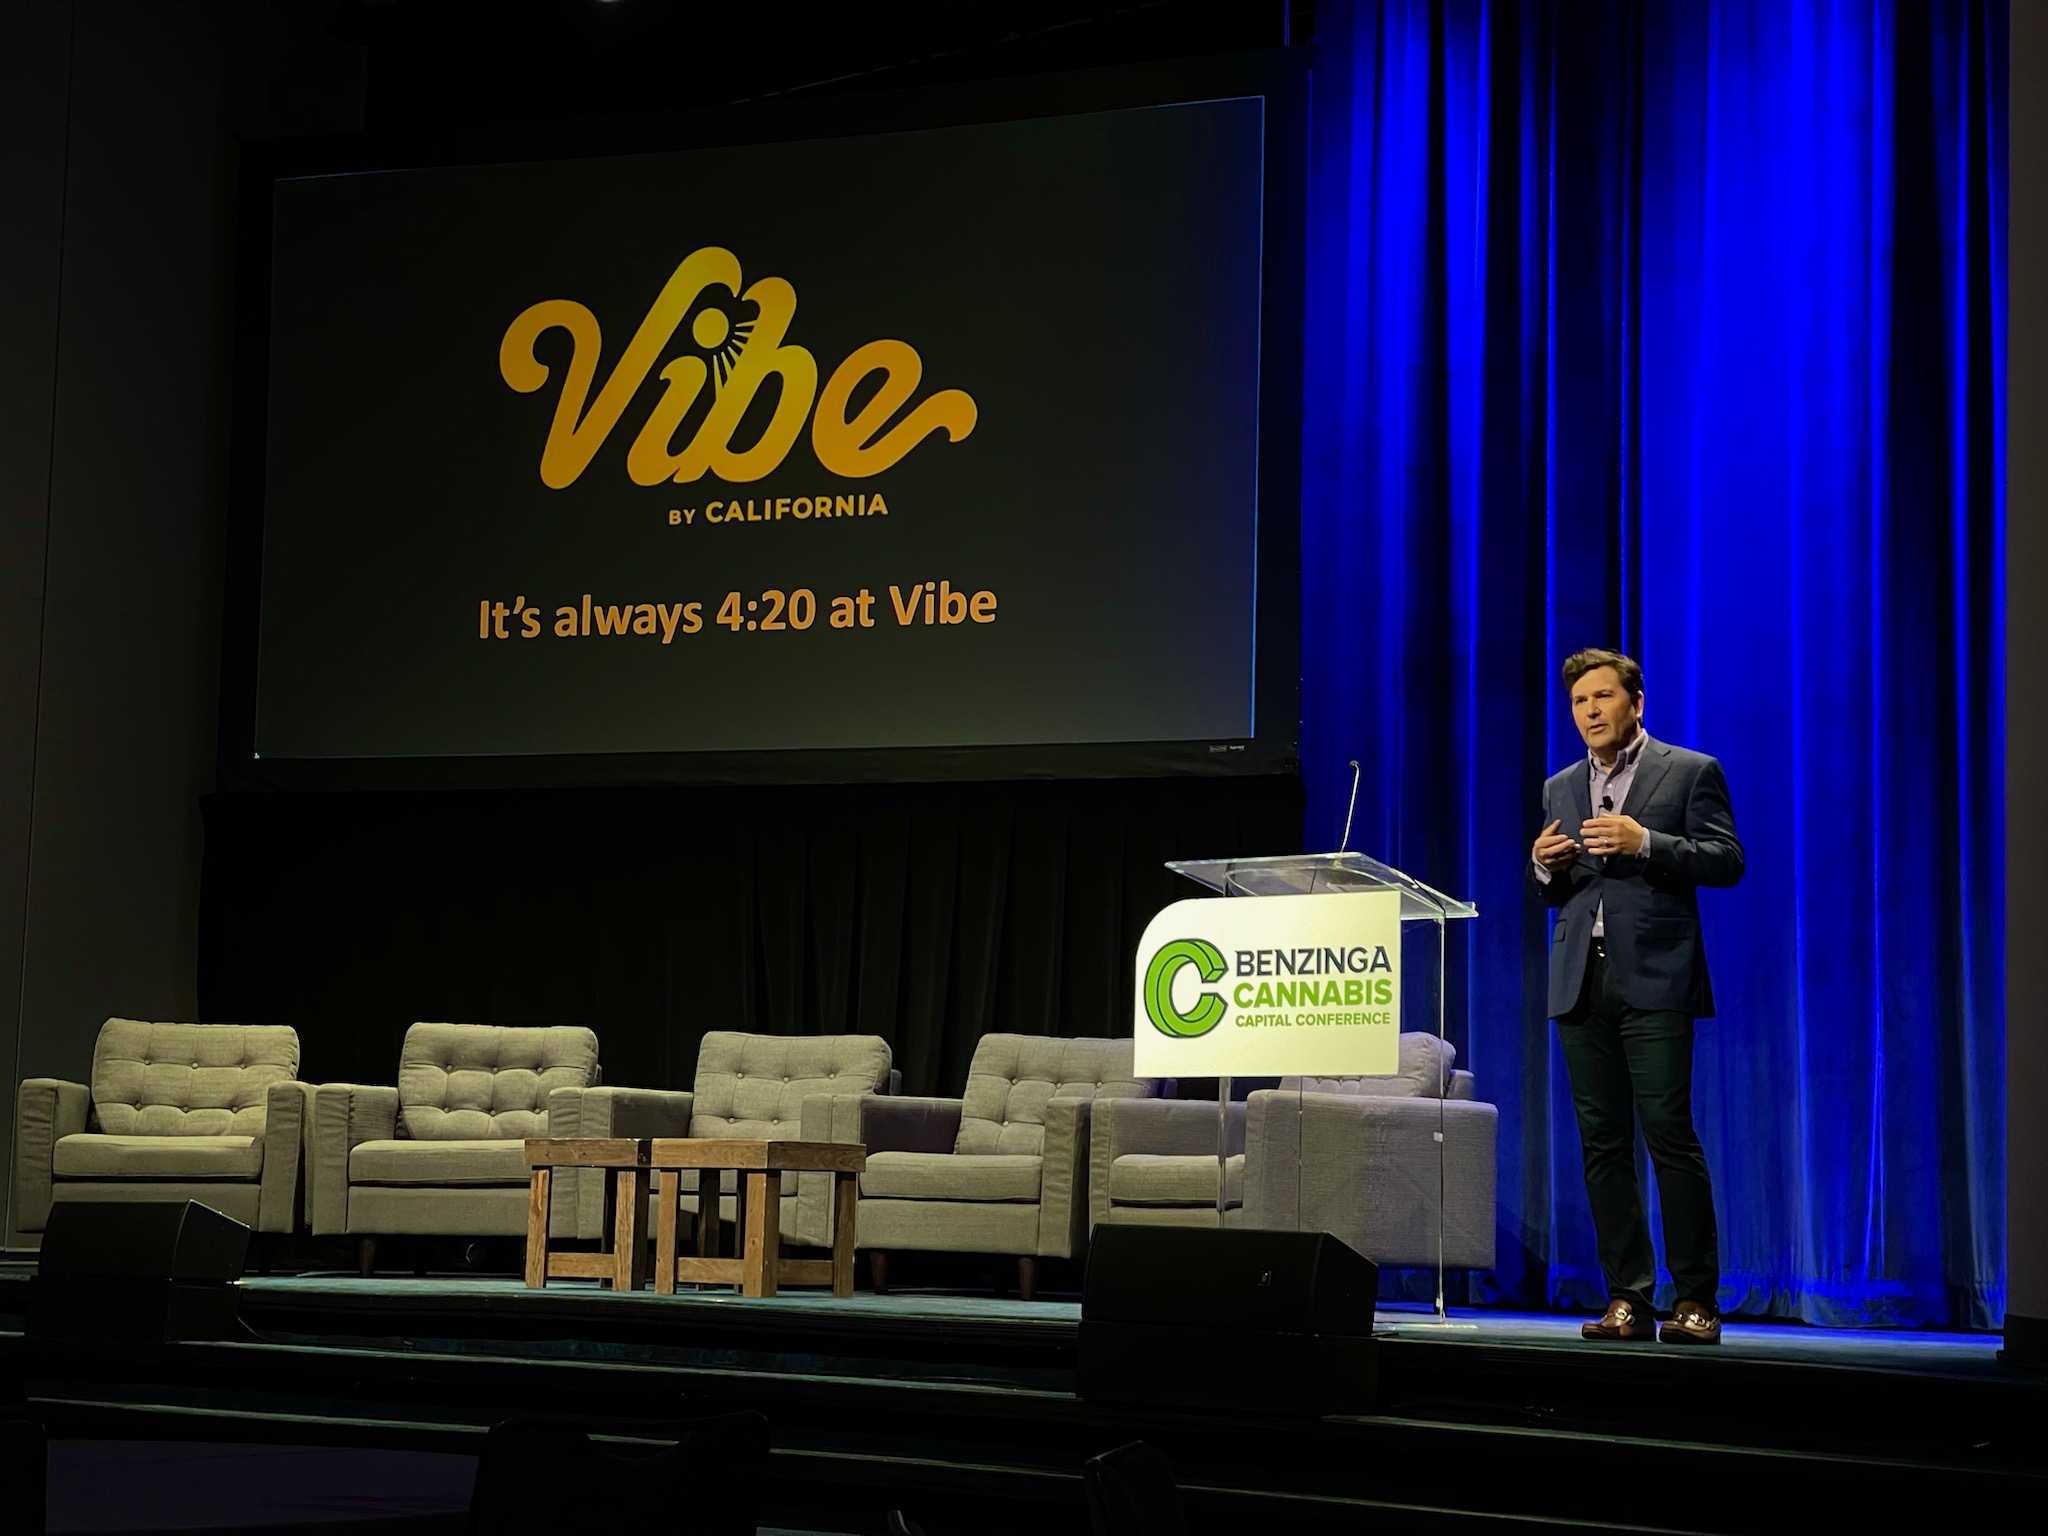 Vibe Growth to Present at the SNN Network Canada Virtual Event December 7 – 9, 2021